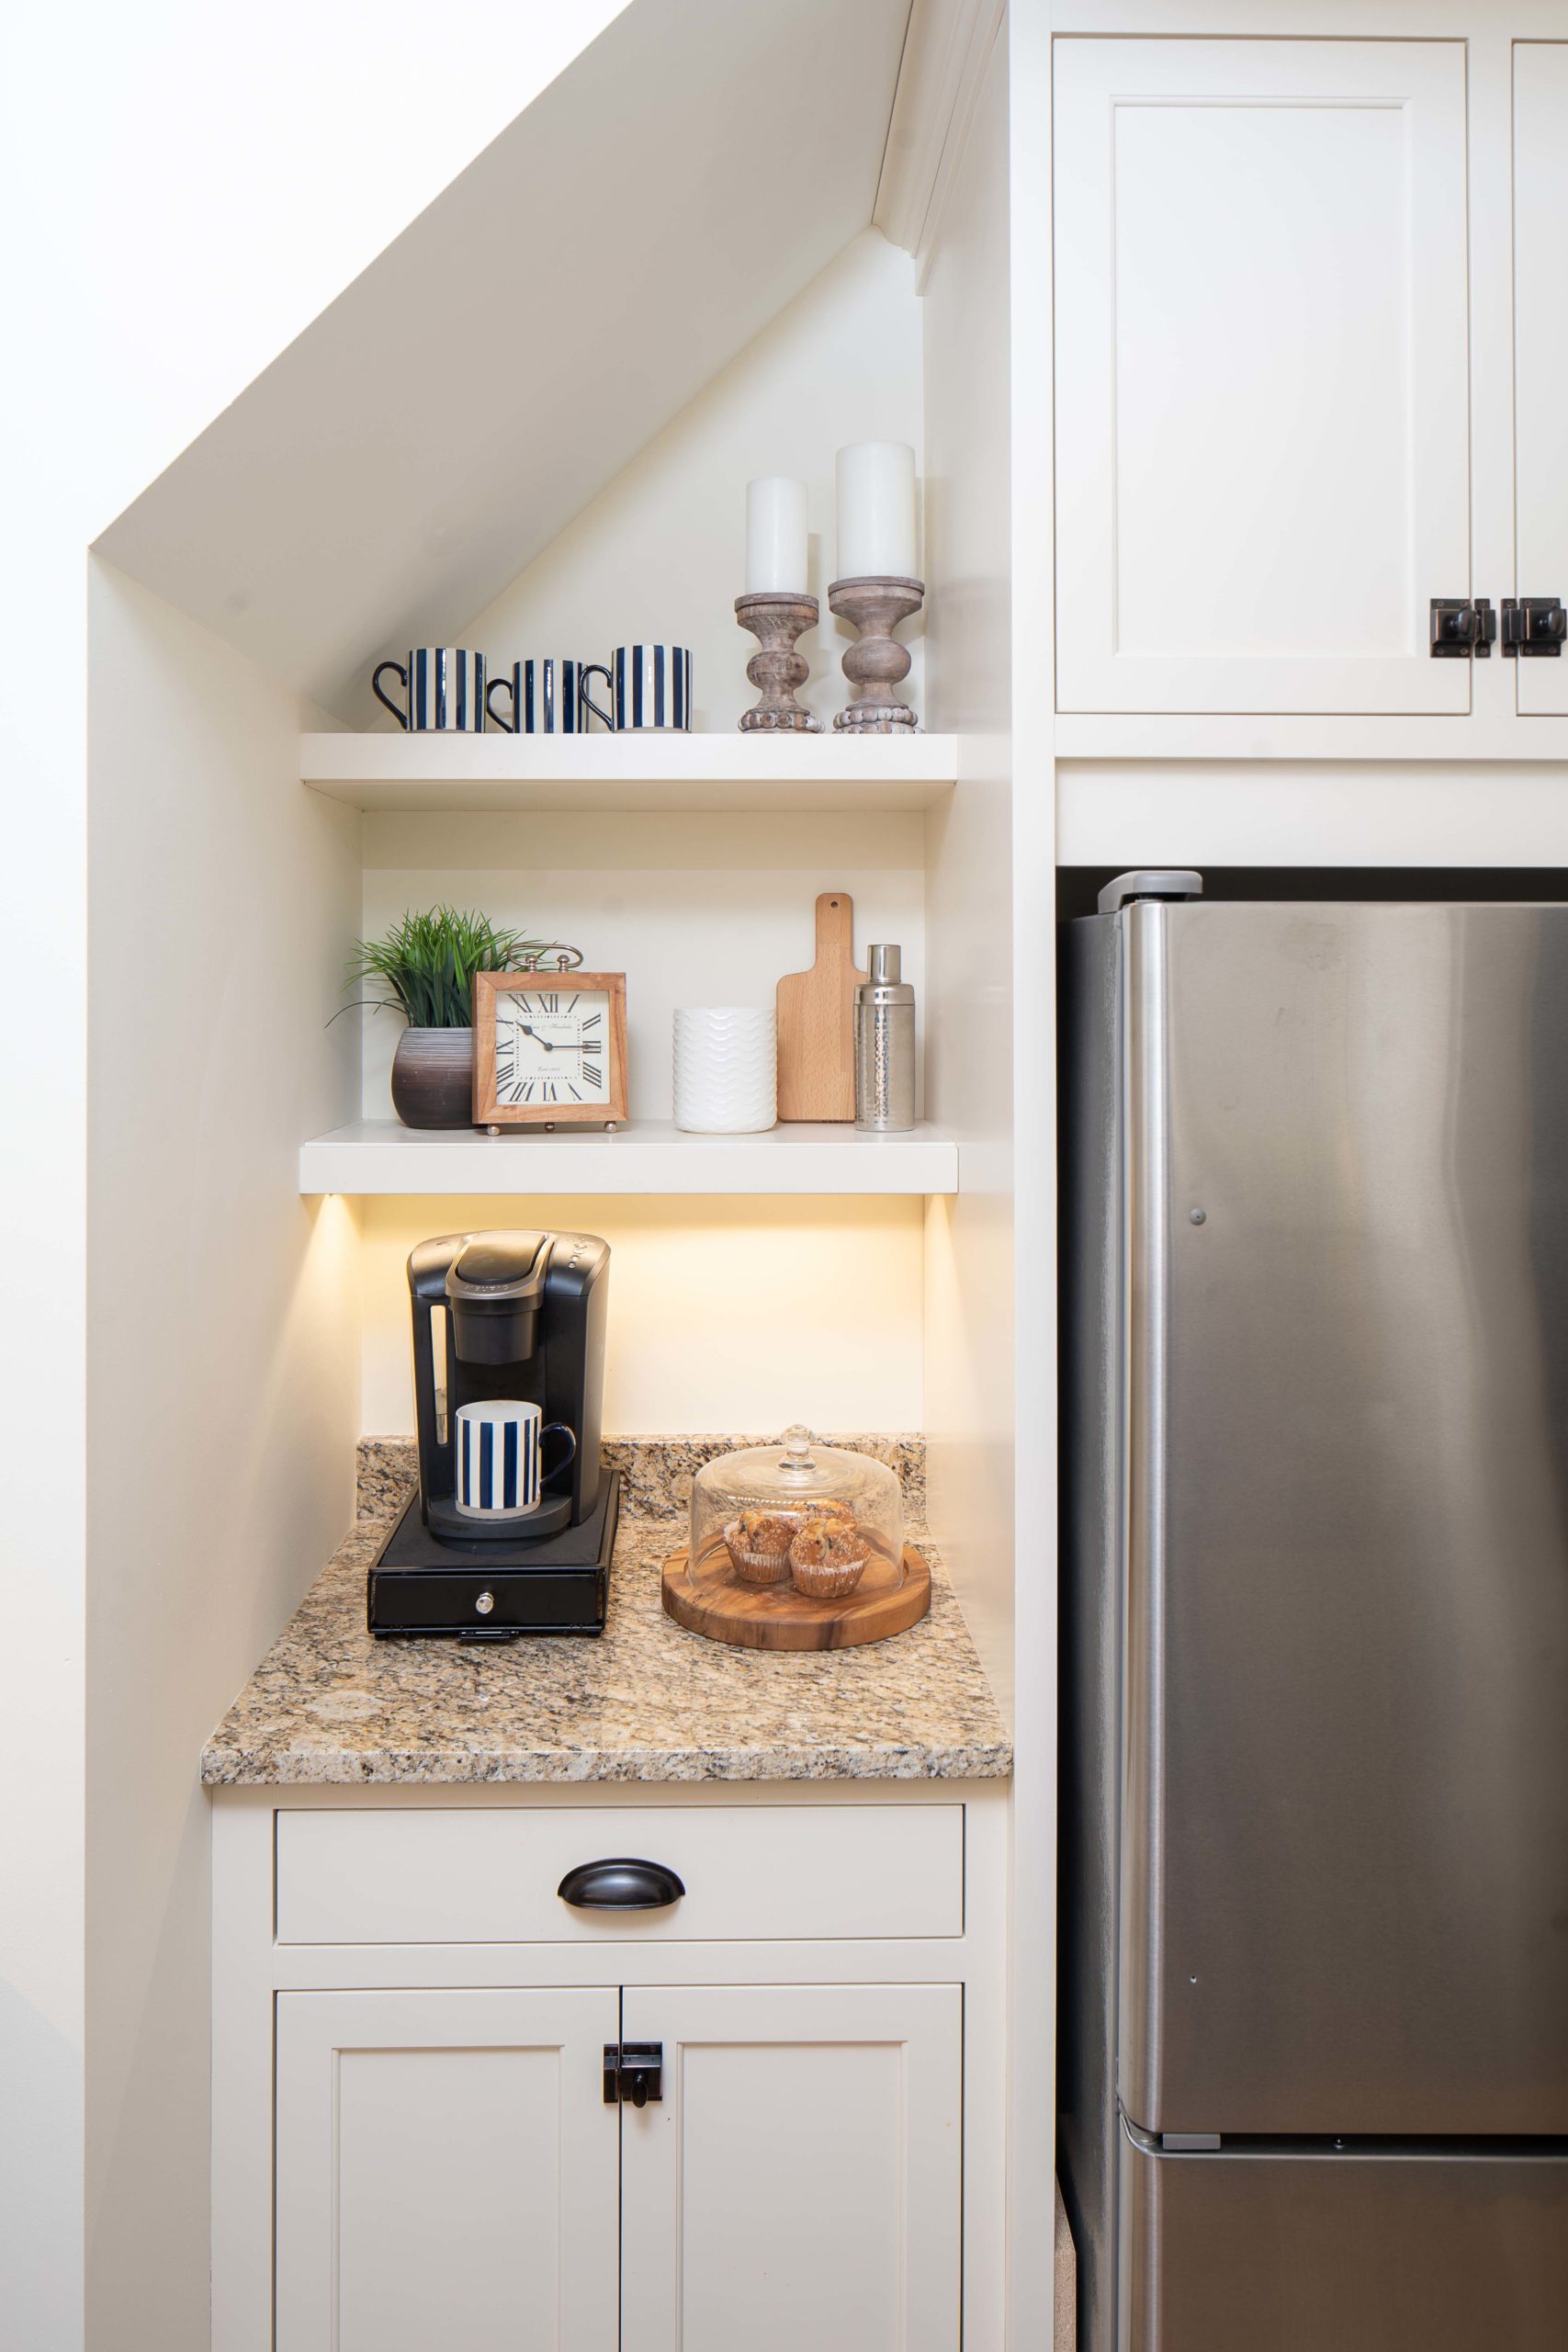 A kitchen with a refrigerator and a coffee maker.